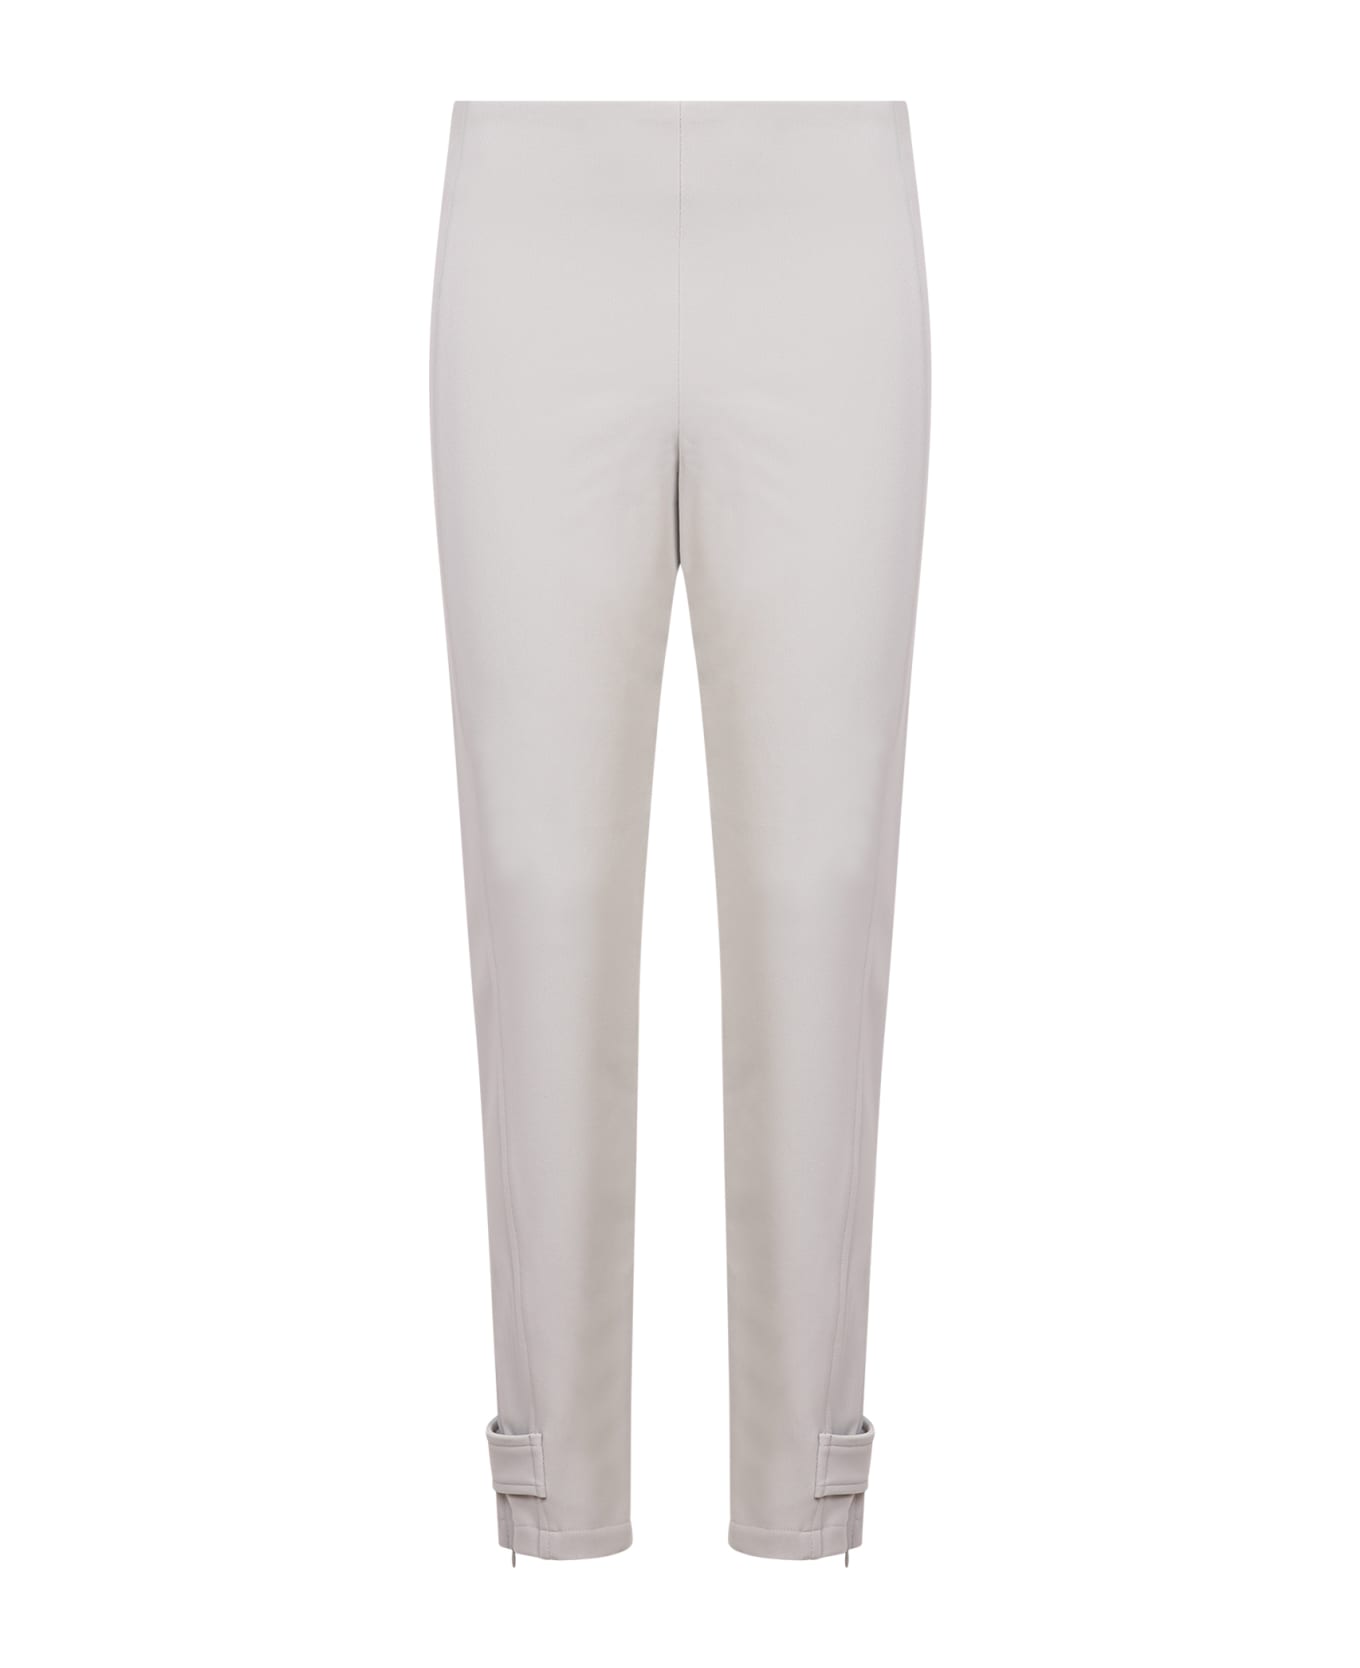 Moncler White Mid-rise Trousers - White ボトムス